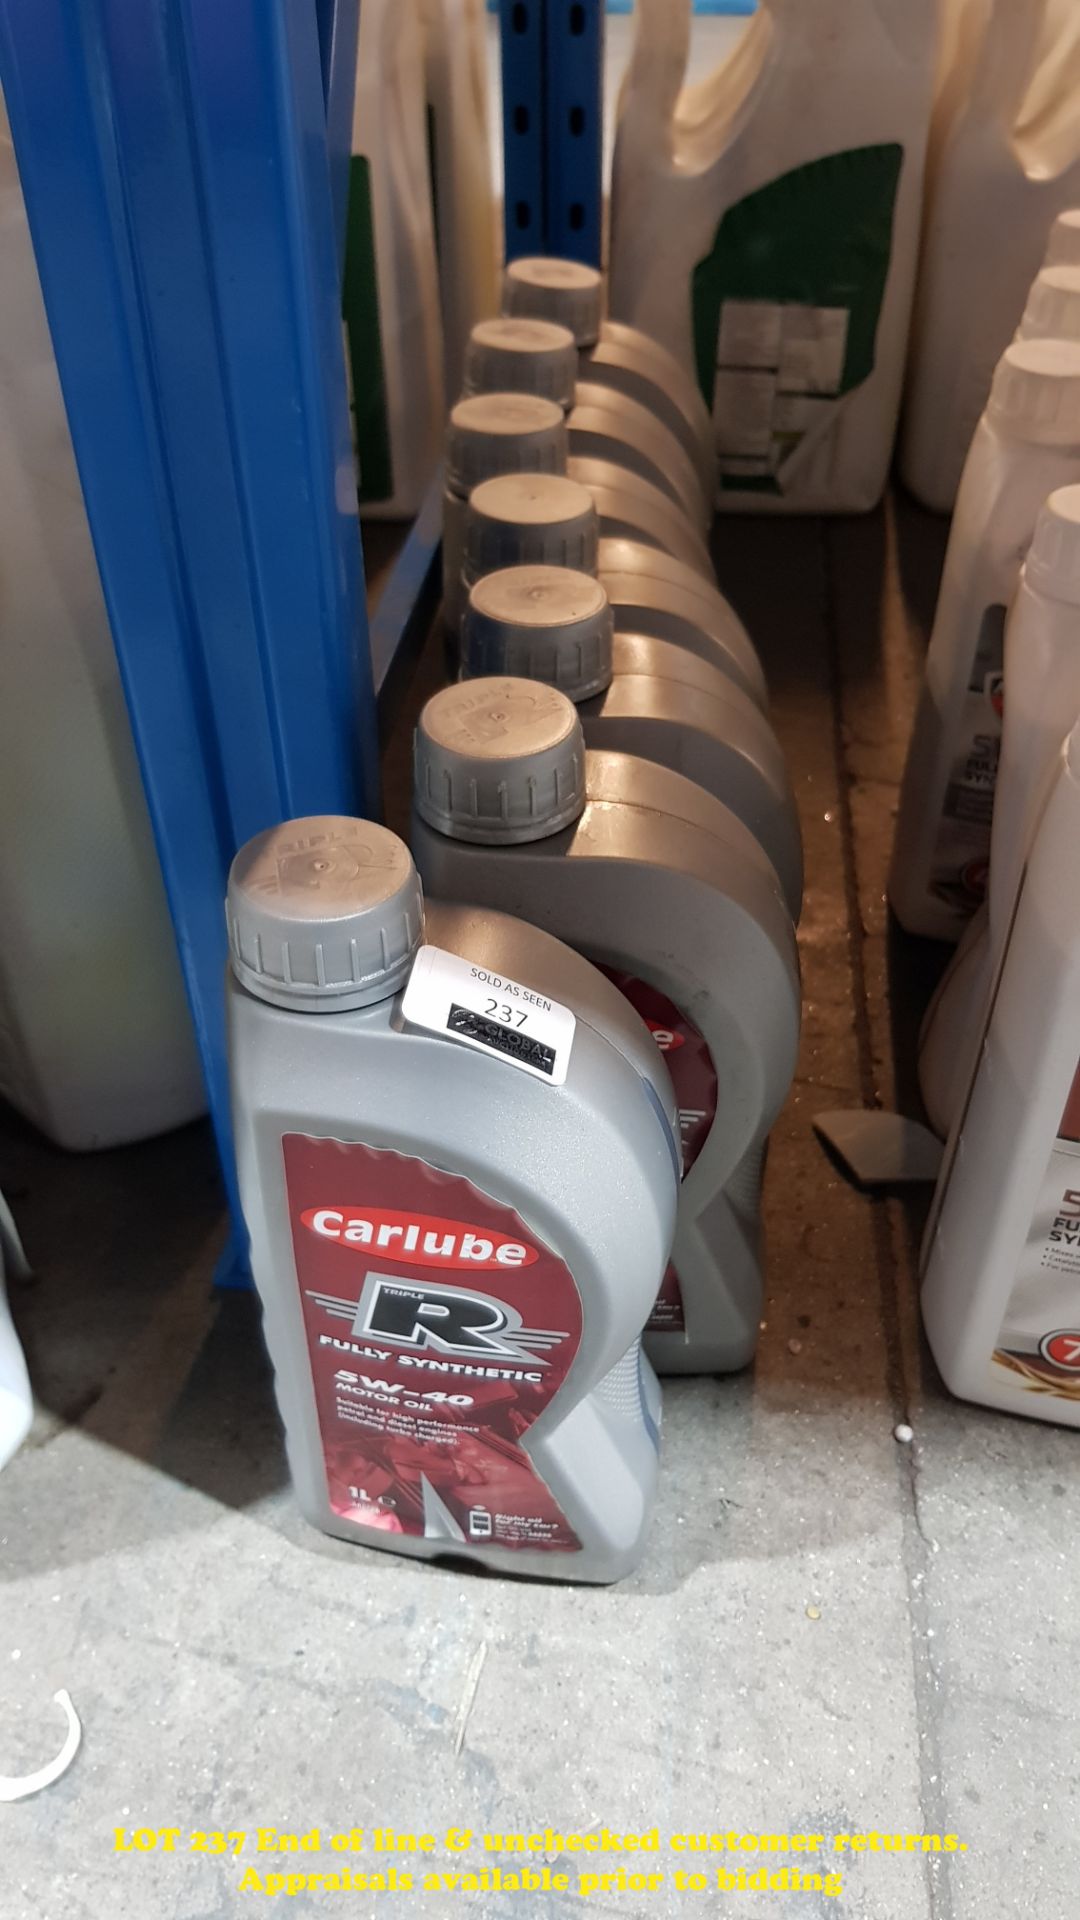 7 X 1L CARLUBE R FULLY SYNTHETIC 5W-40 FULLY SYNTHETIC MOTOR OIL